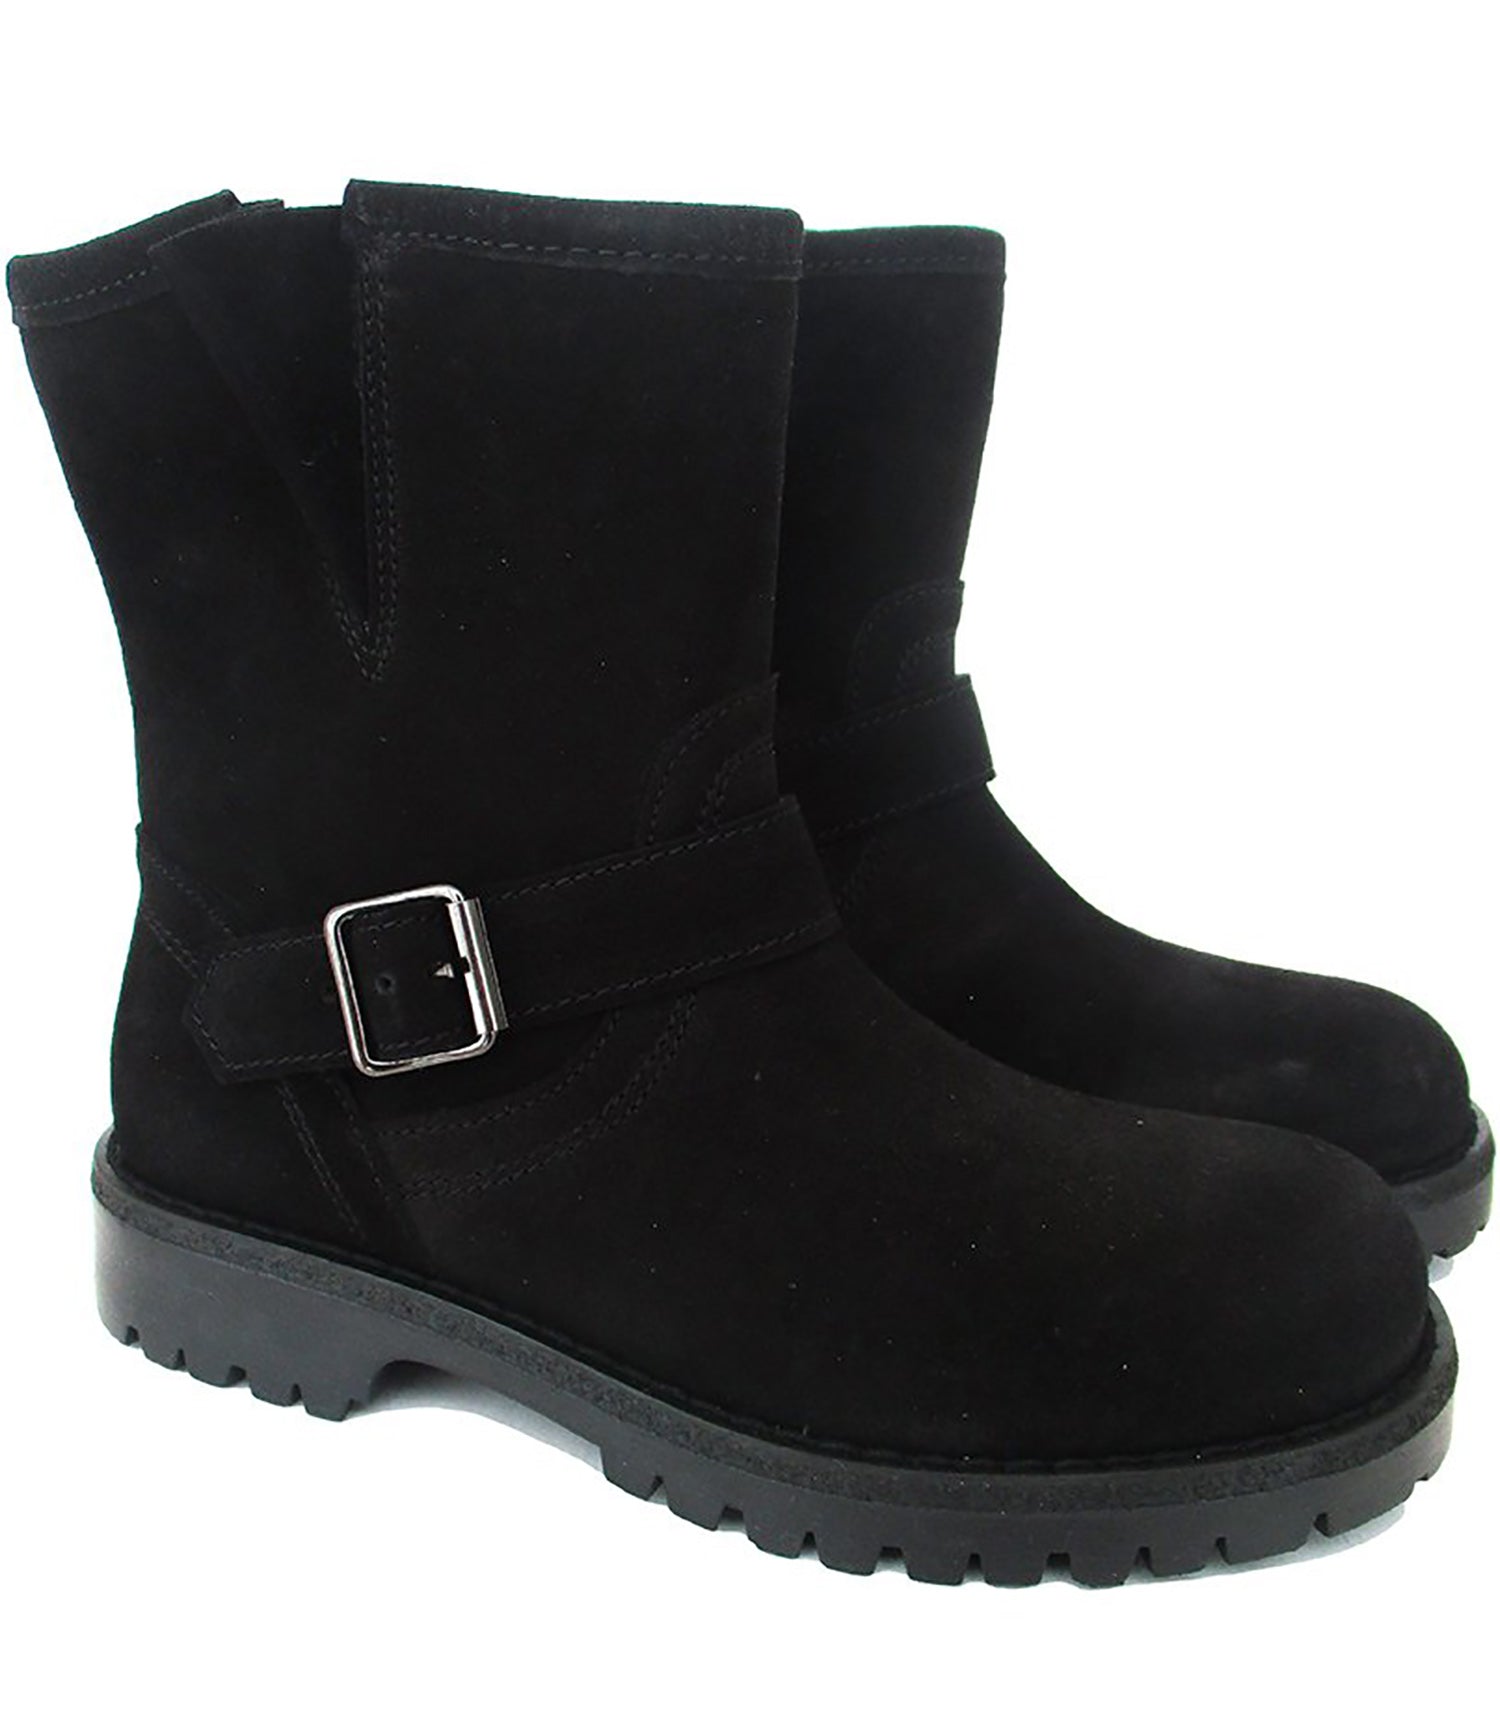 Single Buckle Ankle Boots in Black 